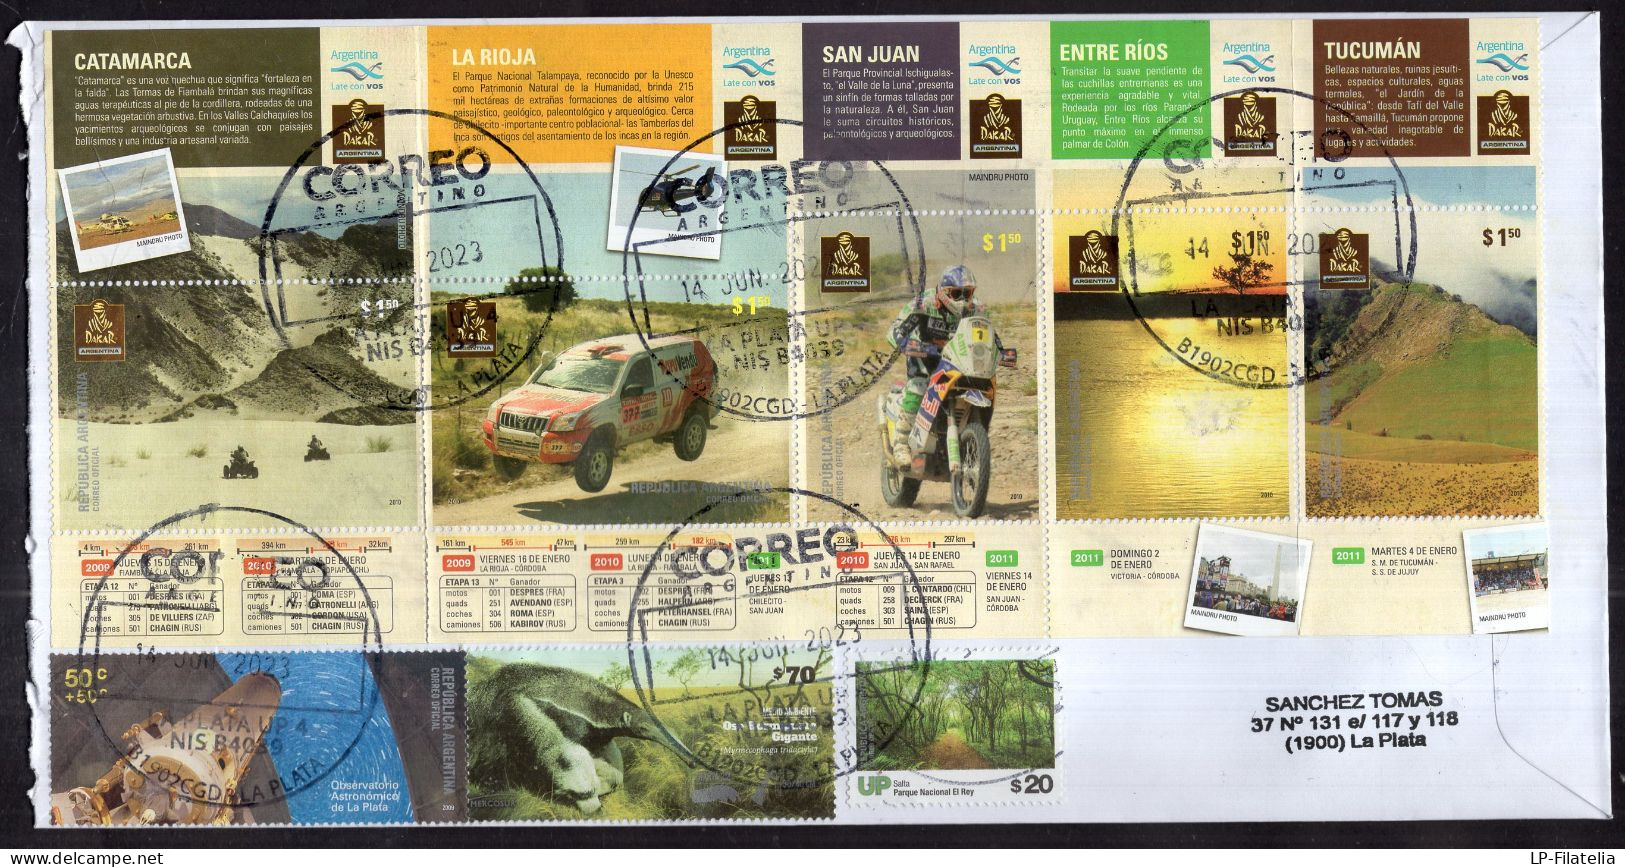 Argentina - 2023 - Rally Dakar - Modern Stamps - Diverse Stamps - Covers & Documents